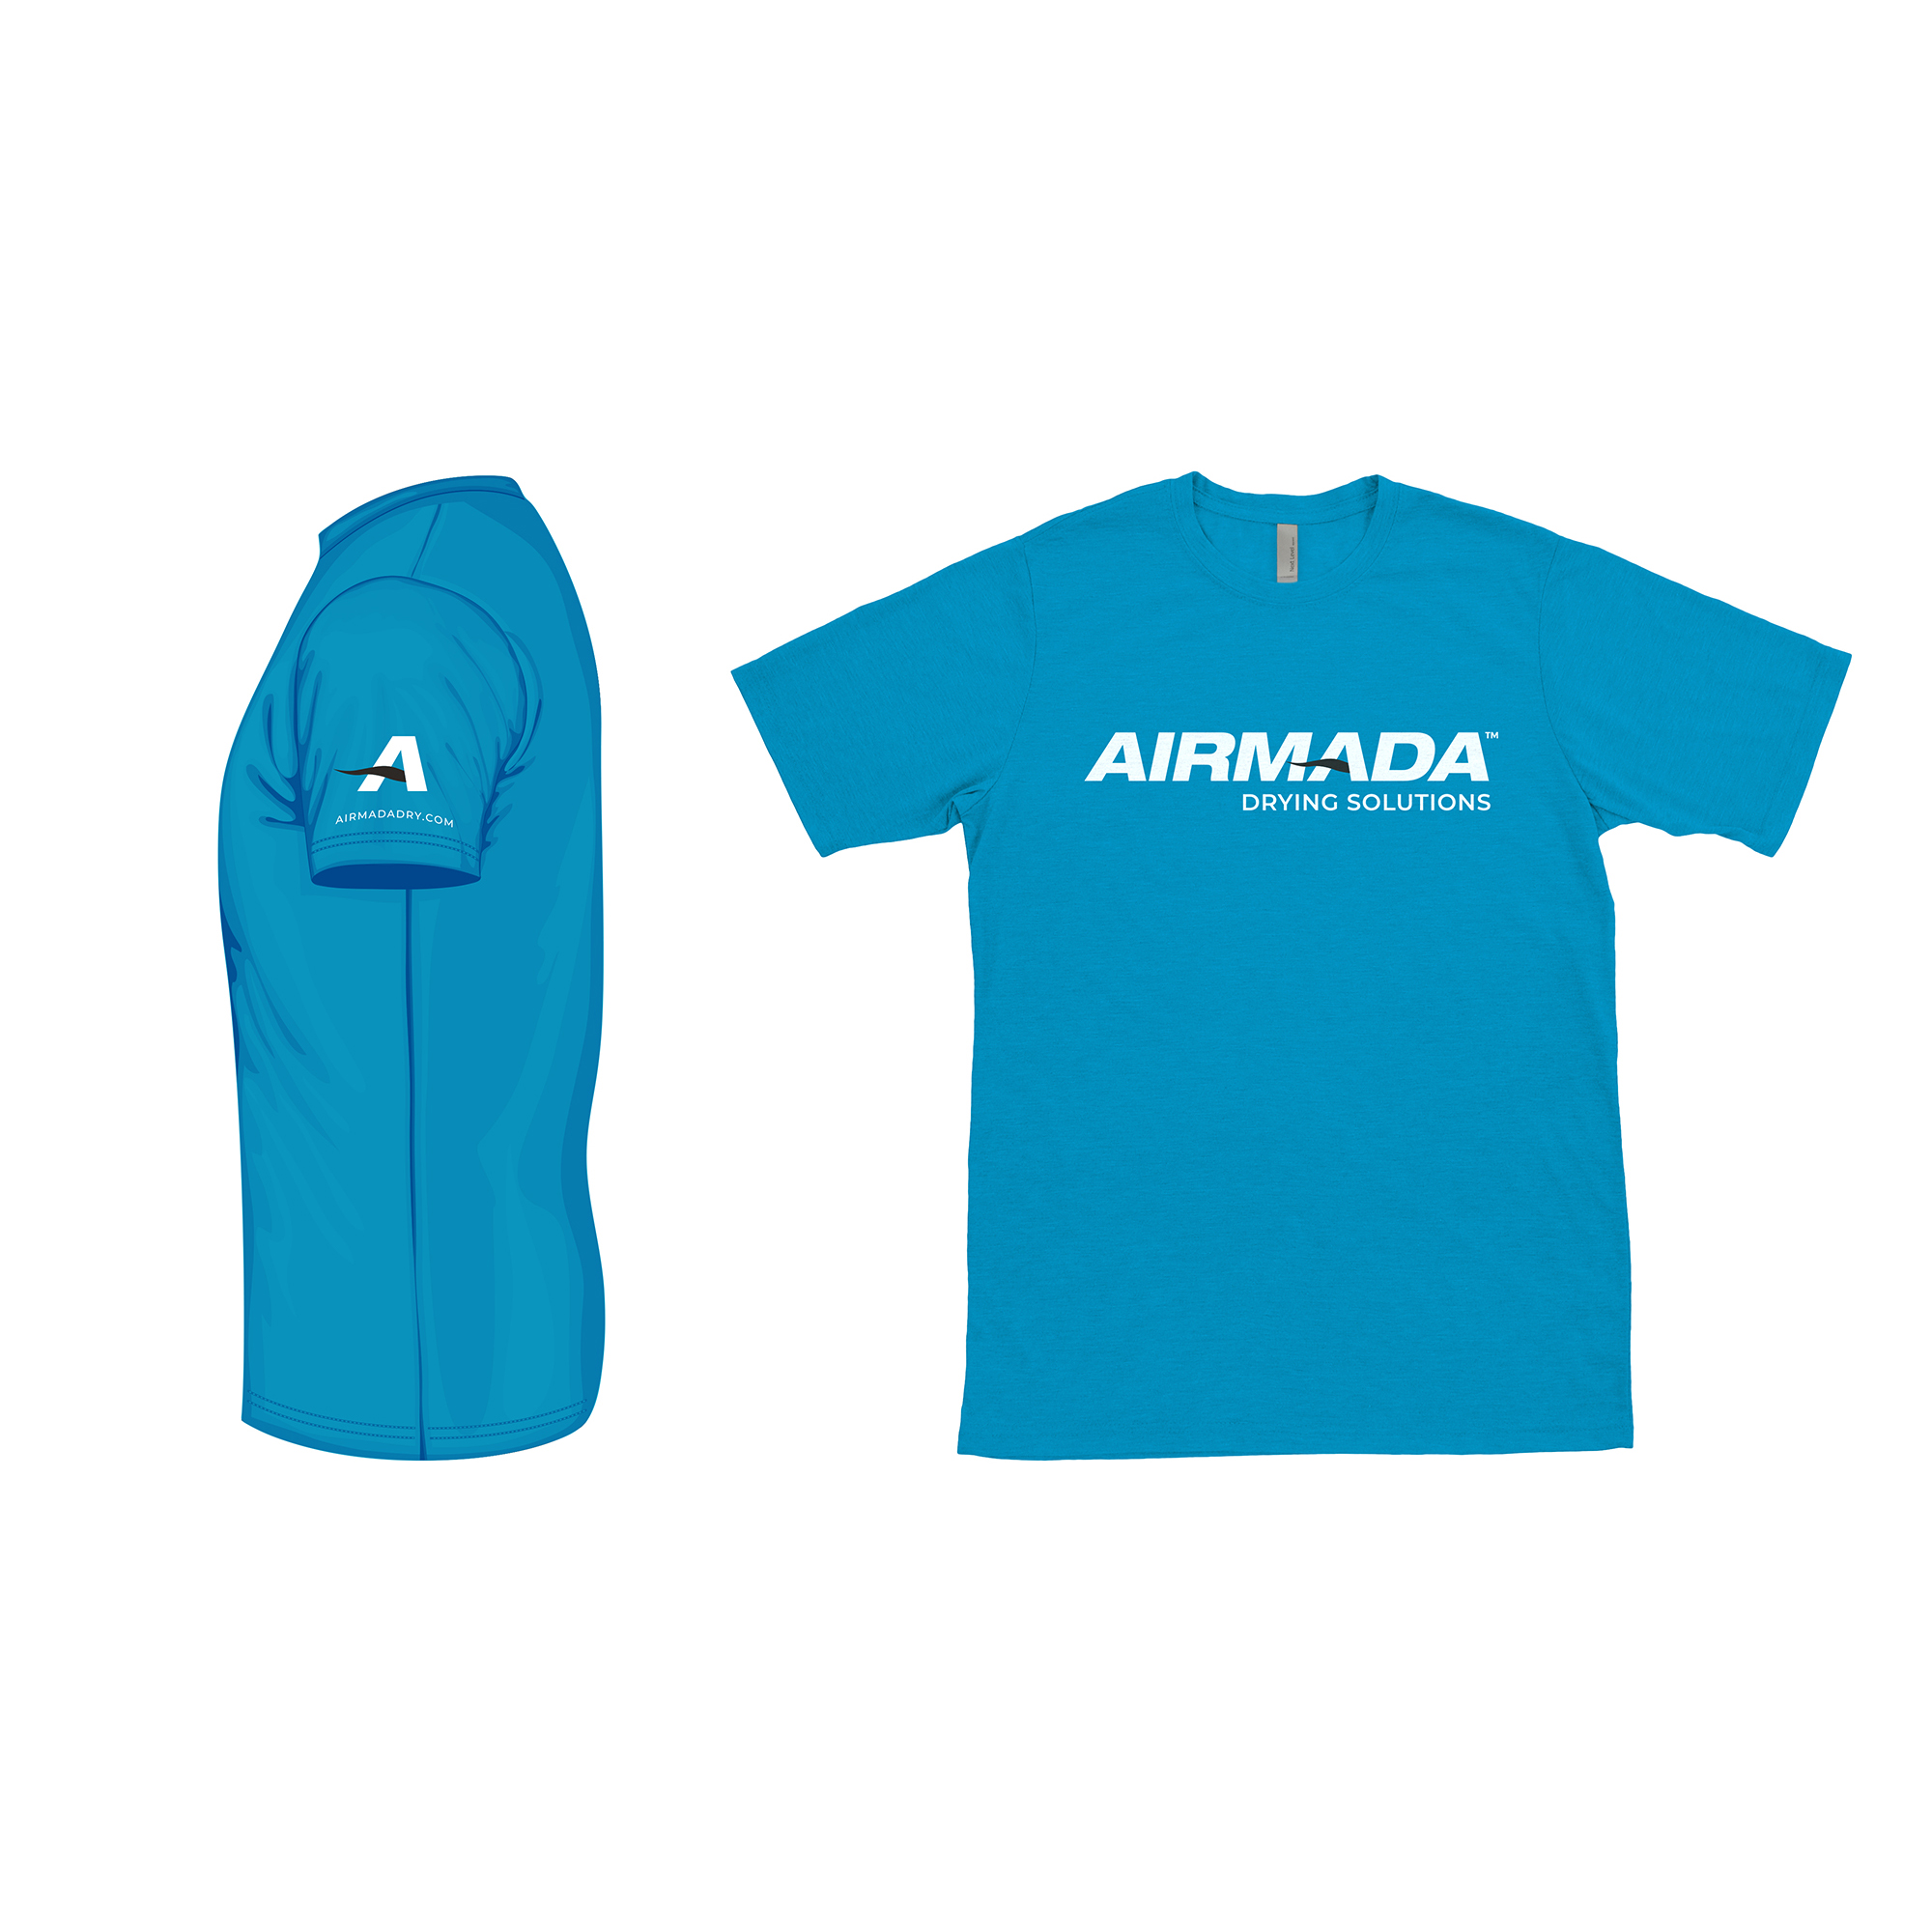 branded apparel with logo - turquoise shirt